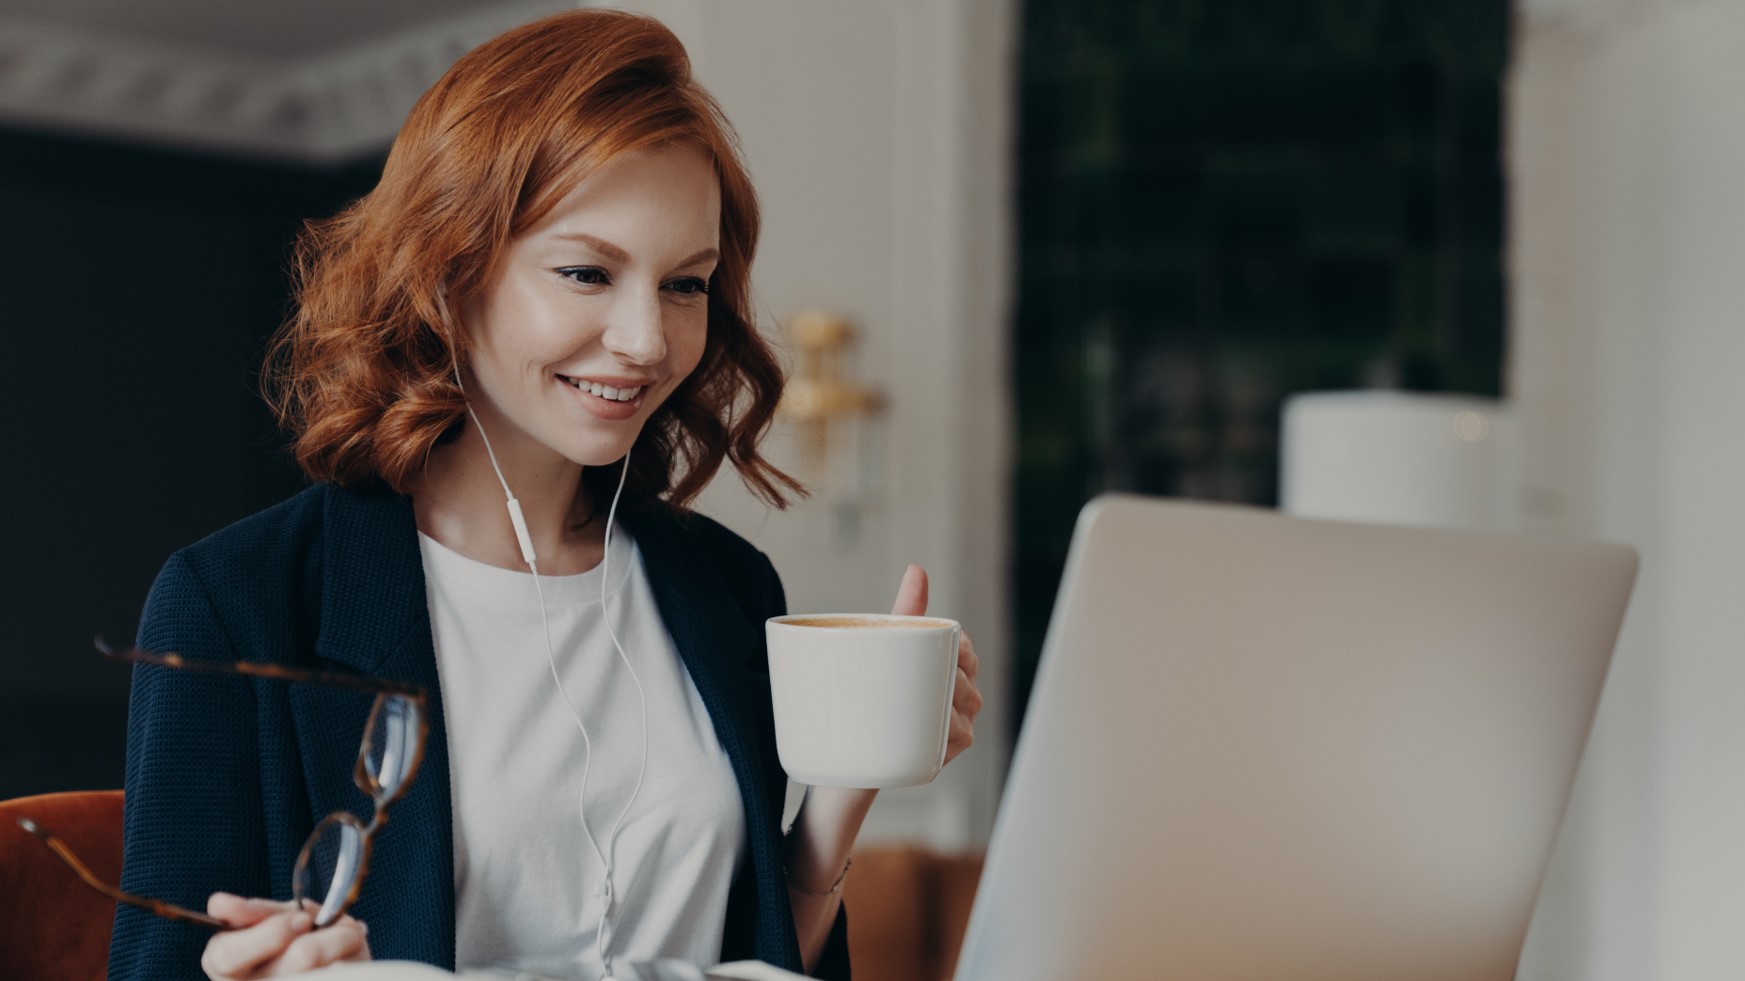 women sat at laptop smiling drinks aromatic coffee holding glasses in hand and dressed formally